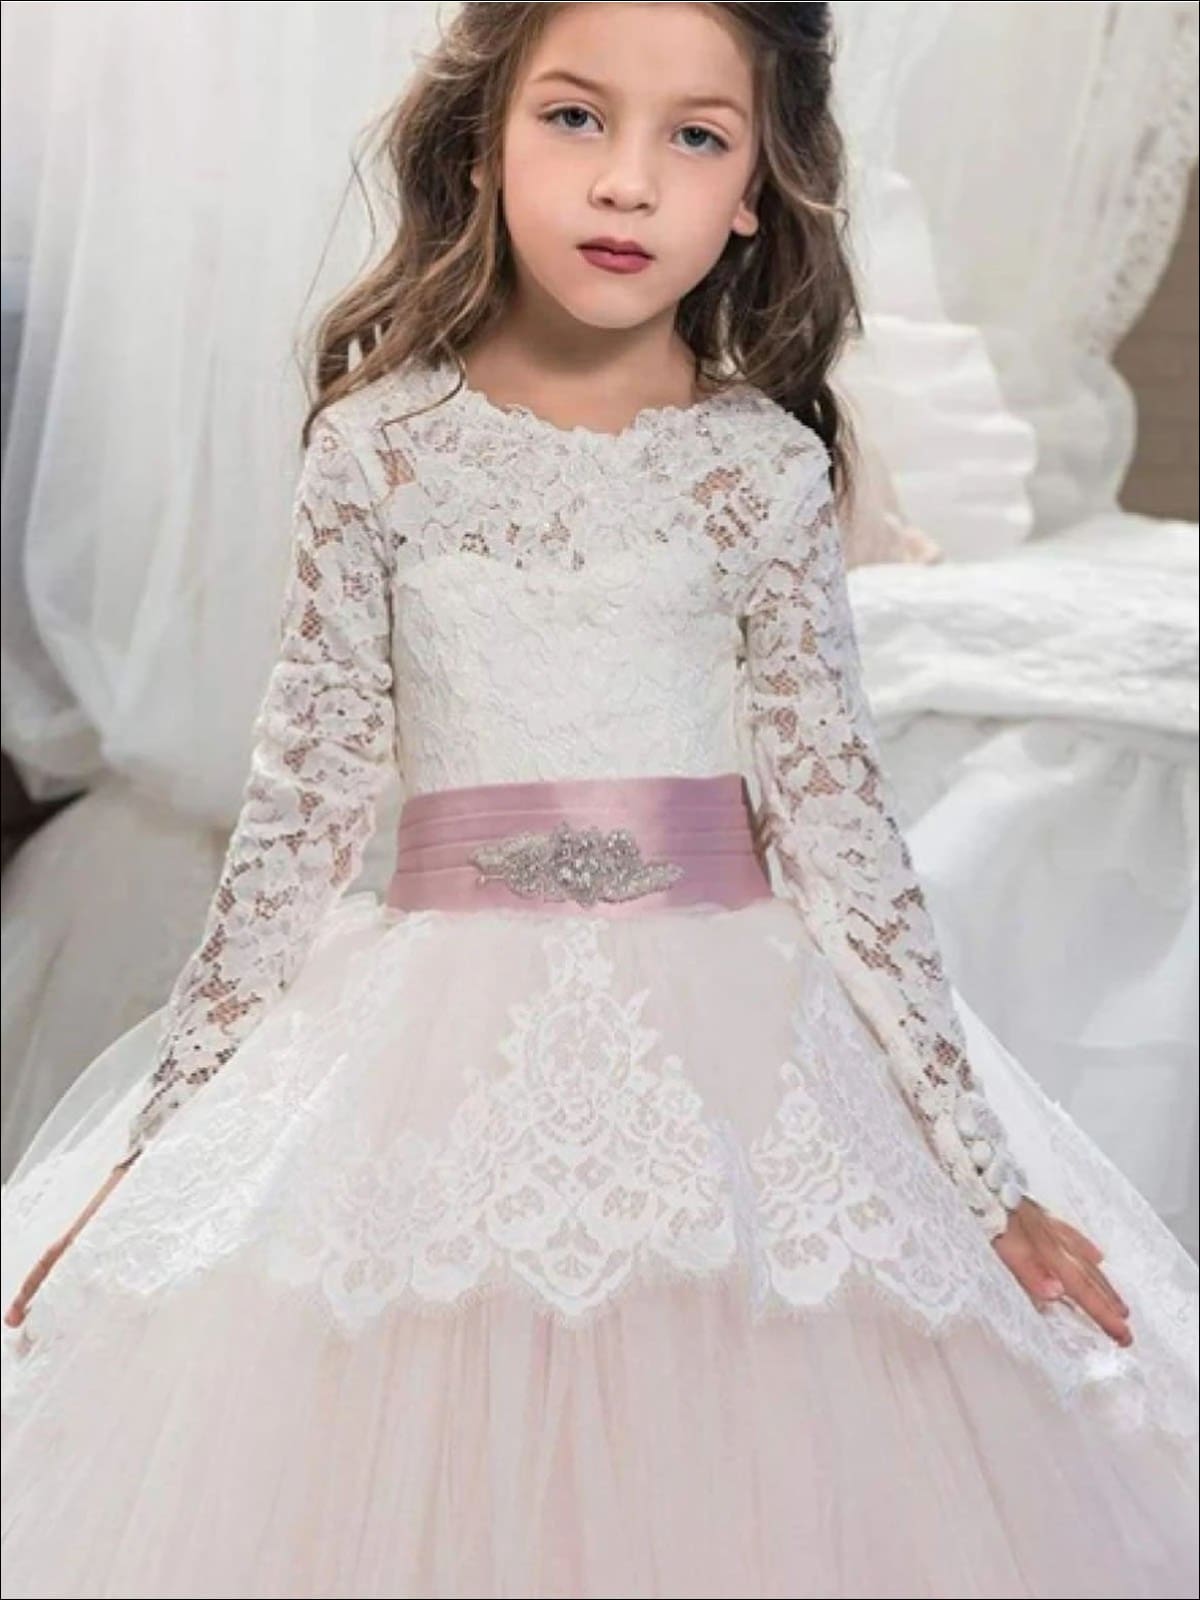 Girls Communion Dresses | Lace Sleeve Crystal Sash Princess Gown